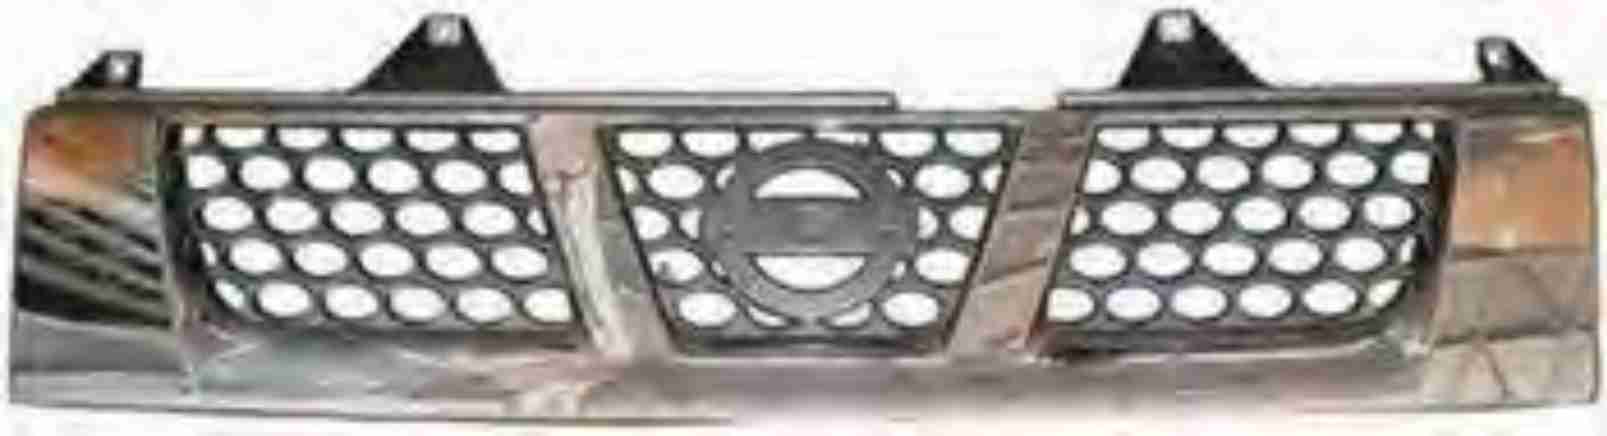 GRI502127 - FRONTIER 01 GRILLE...2005748